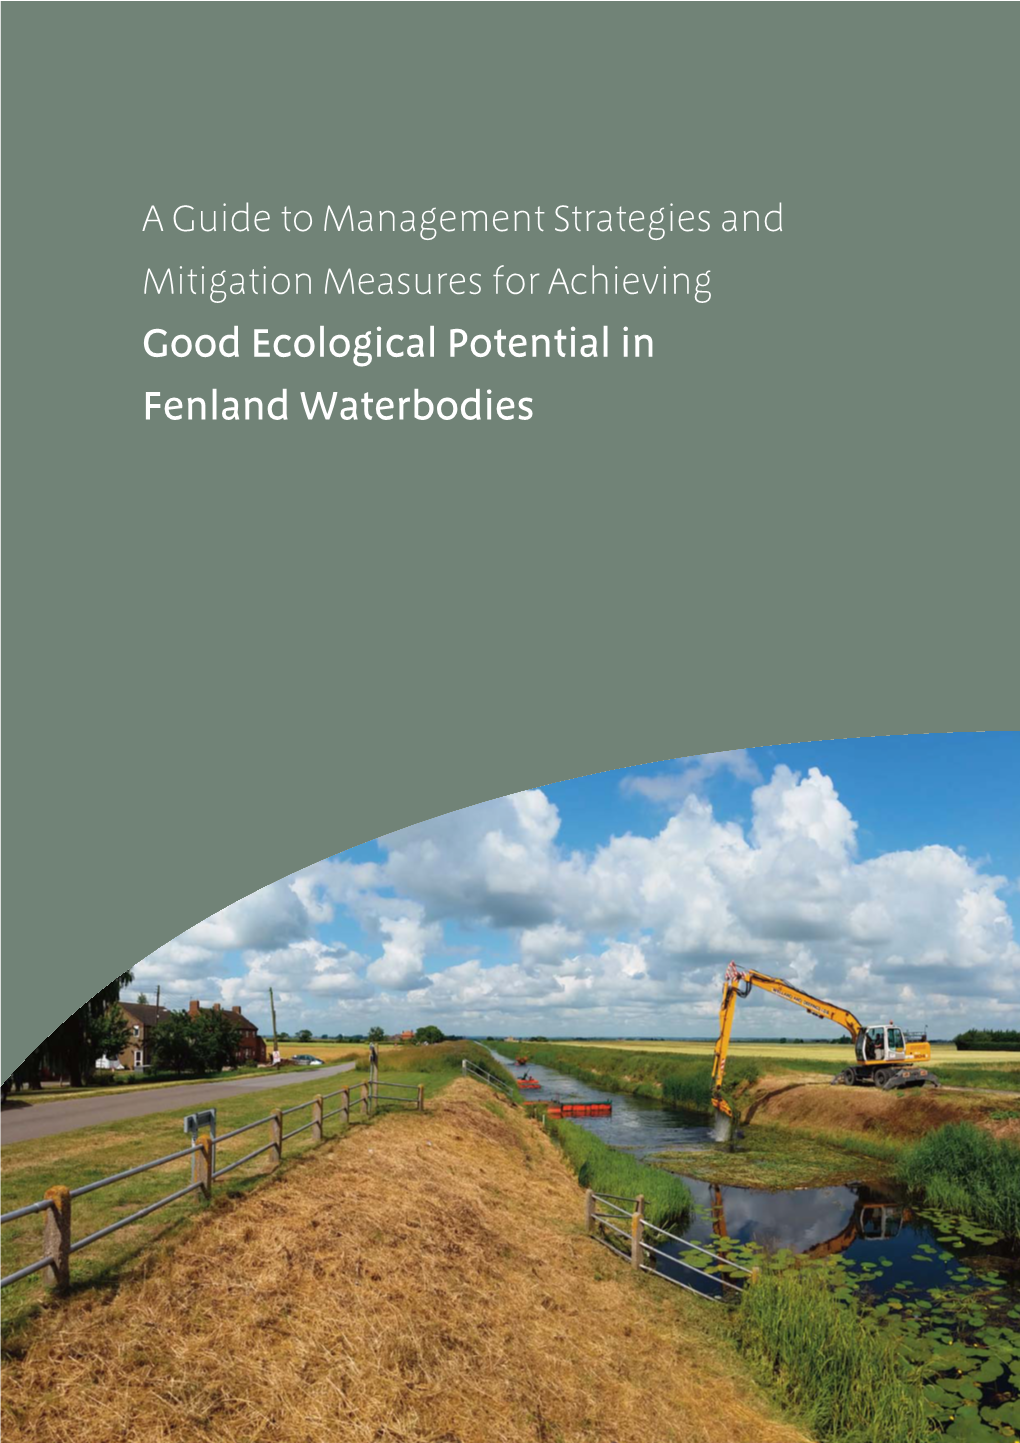 Good Ecological Potential in Fenland Waterbodies